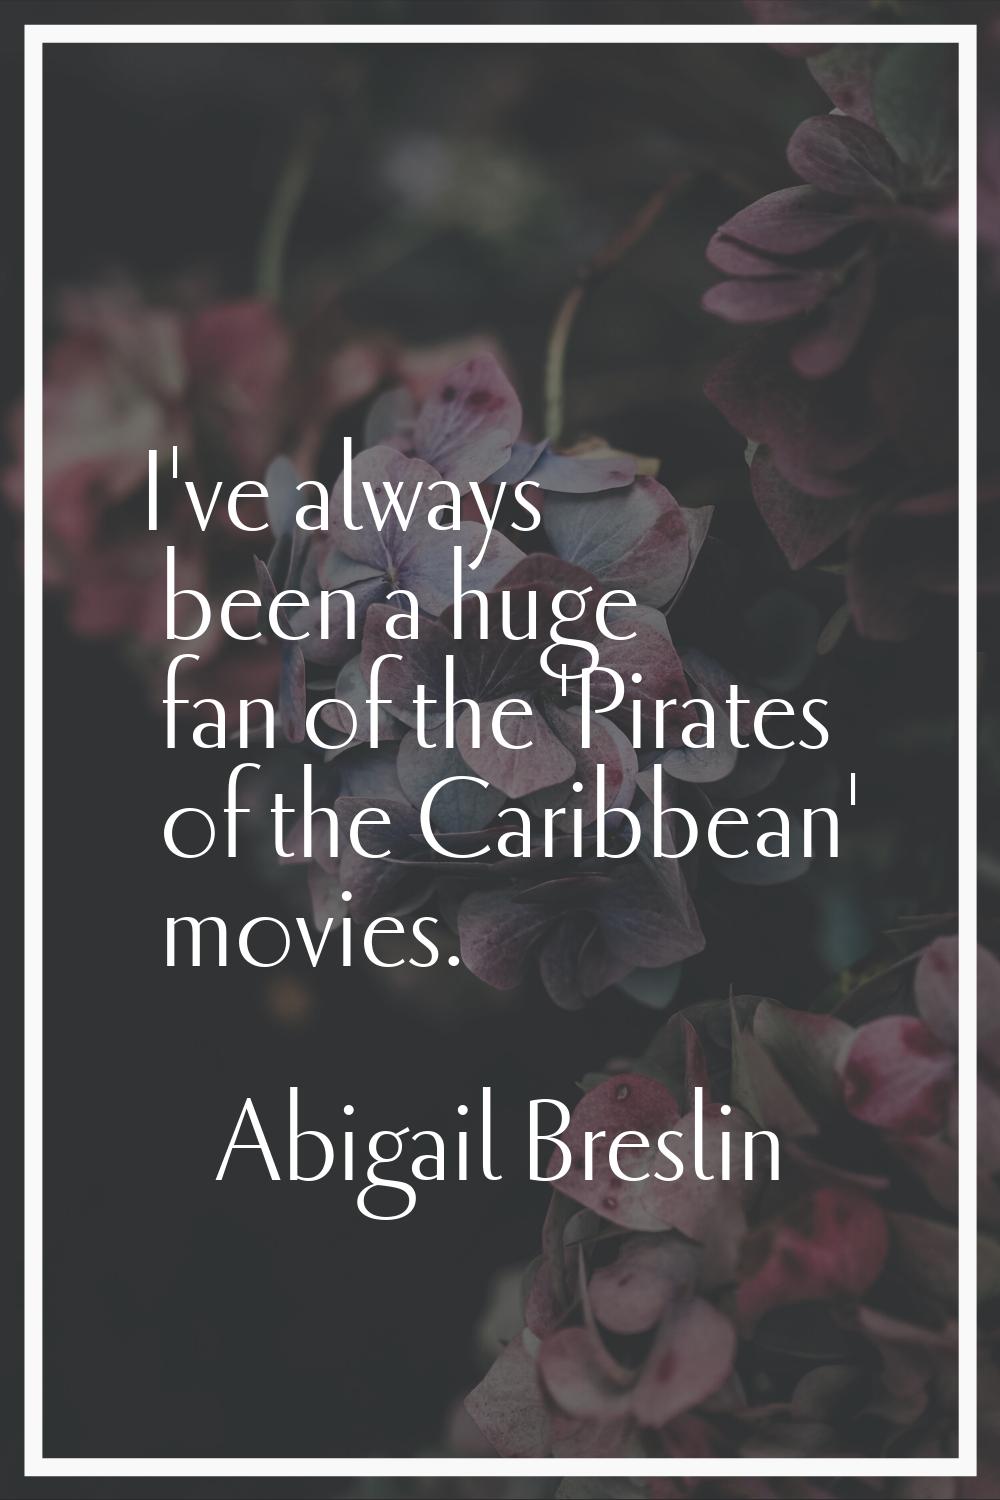 I've always been a huge fan of the 'Pirates of the Caribbean' movies.